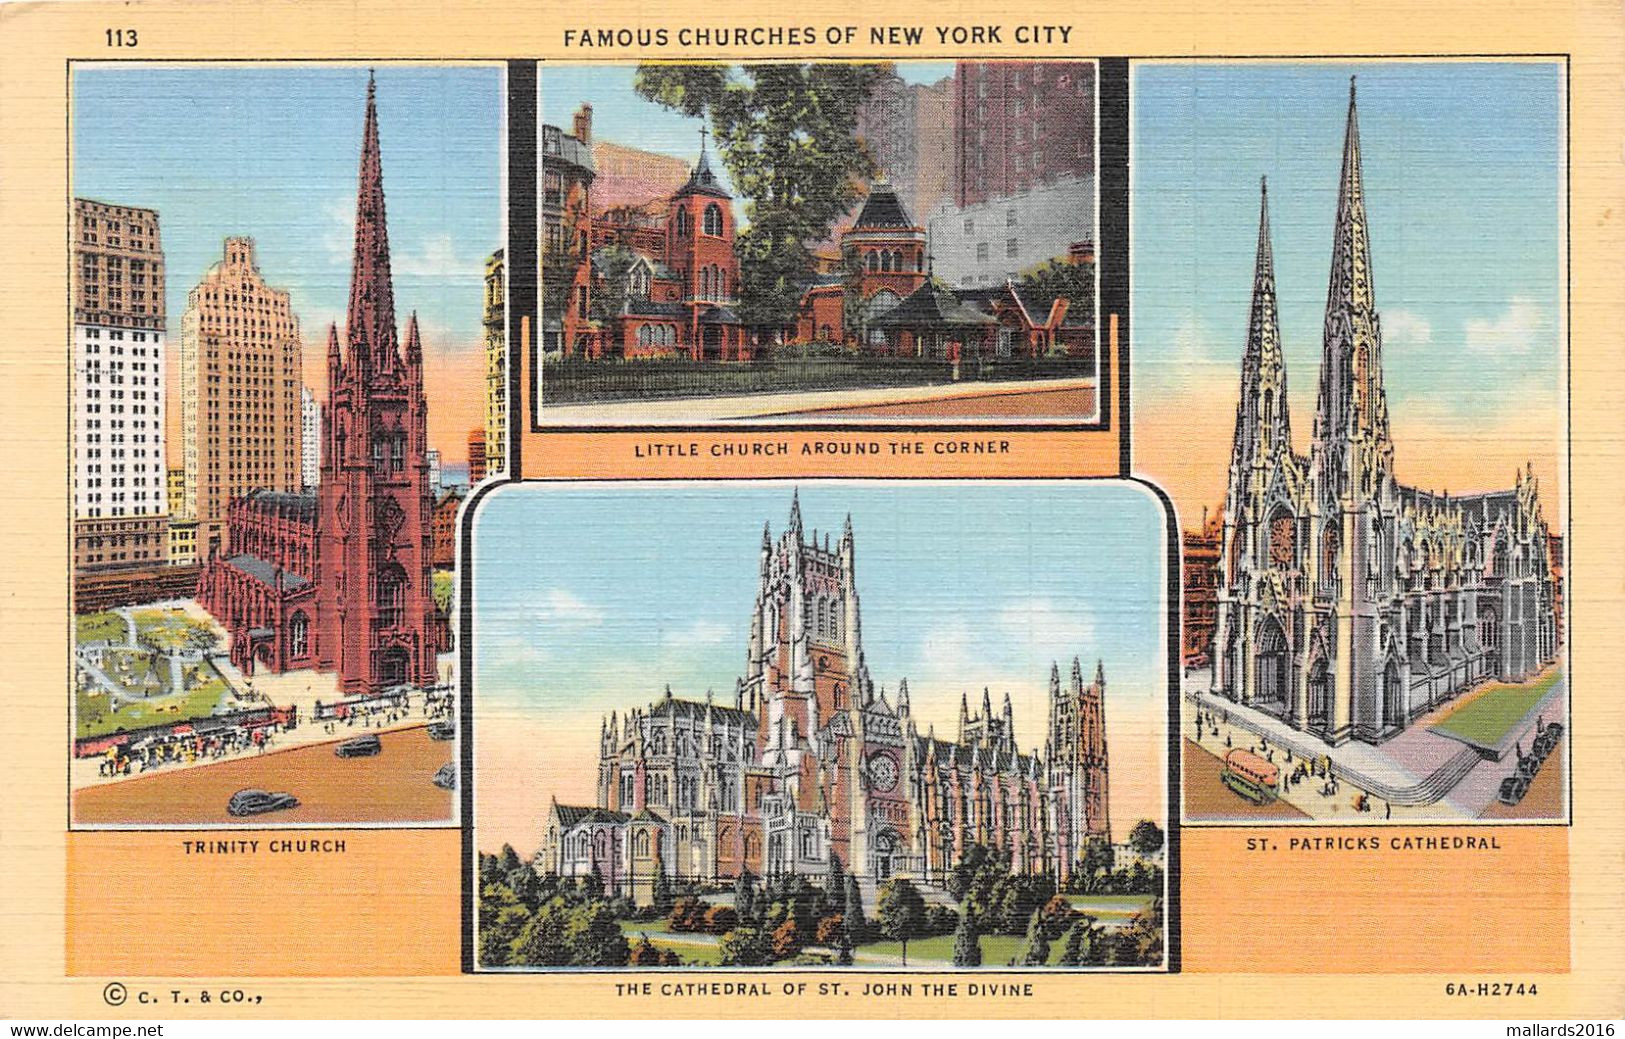 NEW YORK - FAMOUS CHURCHES OF NEW YORK CITY ~ AN OLD MULIVIEW POSTCARD #223197 - Churches